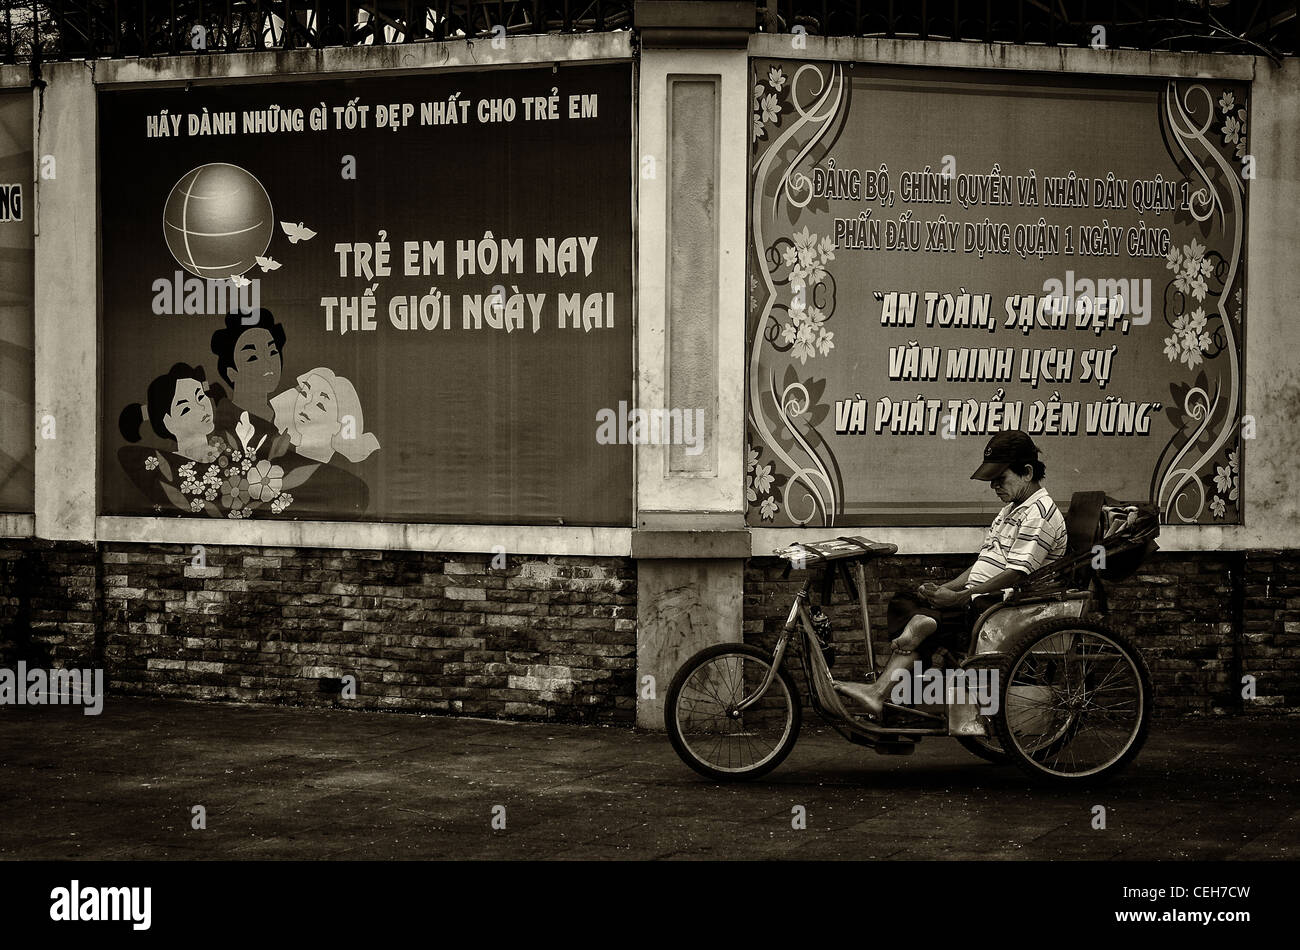 Lottery tickets seller in front of communist propaganda posters in Ho Chi Minh City, Vietnam Stock Photo